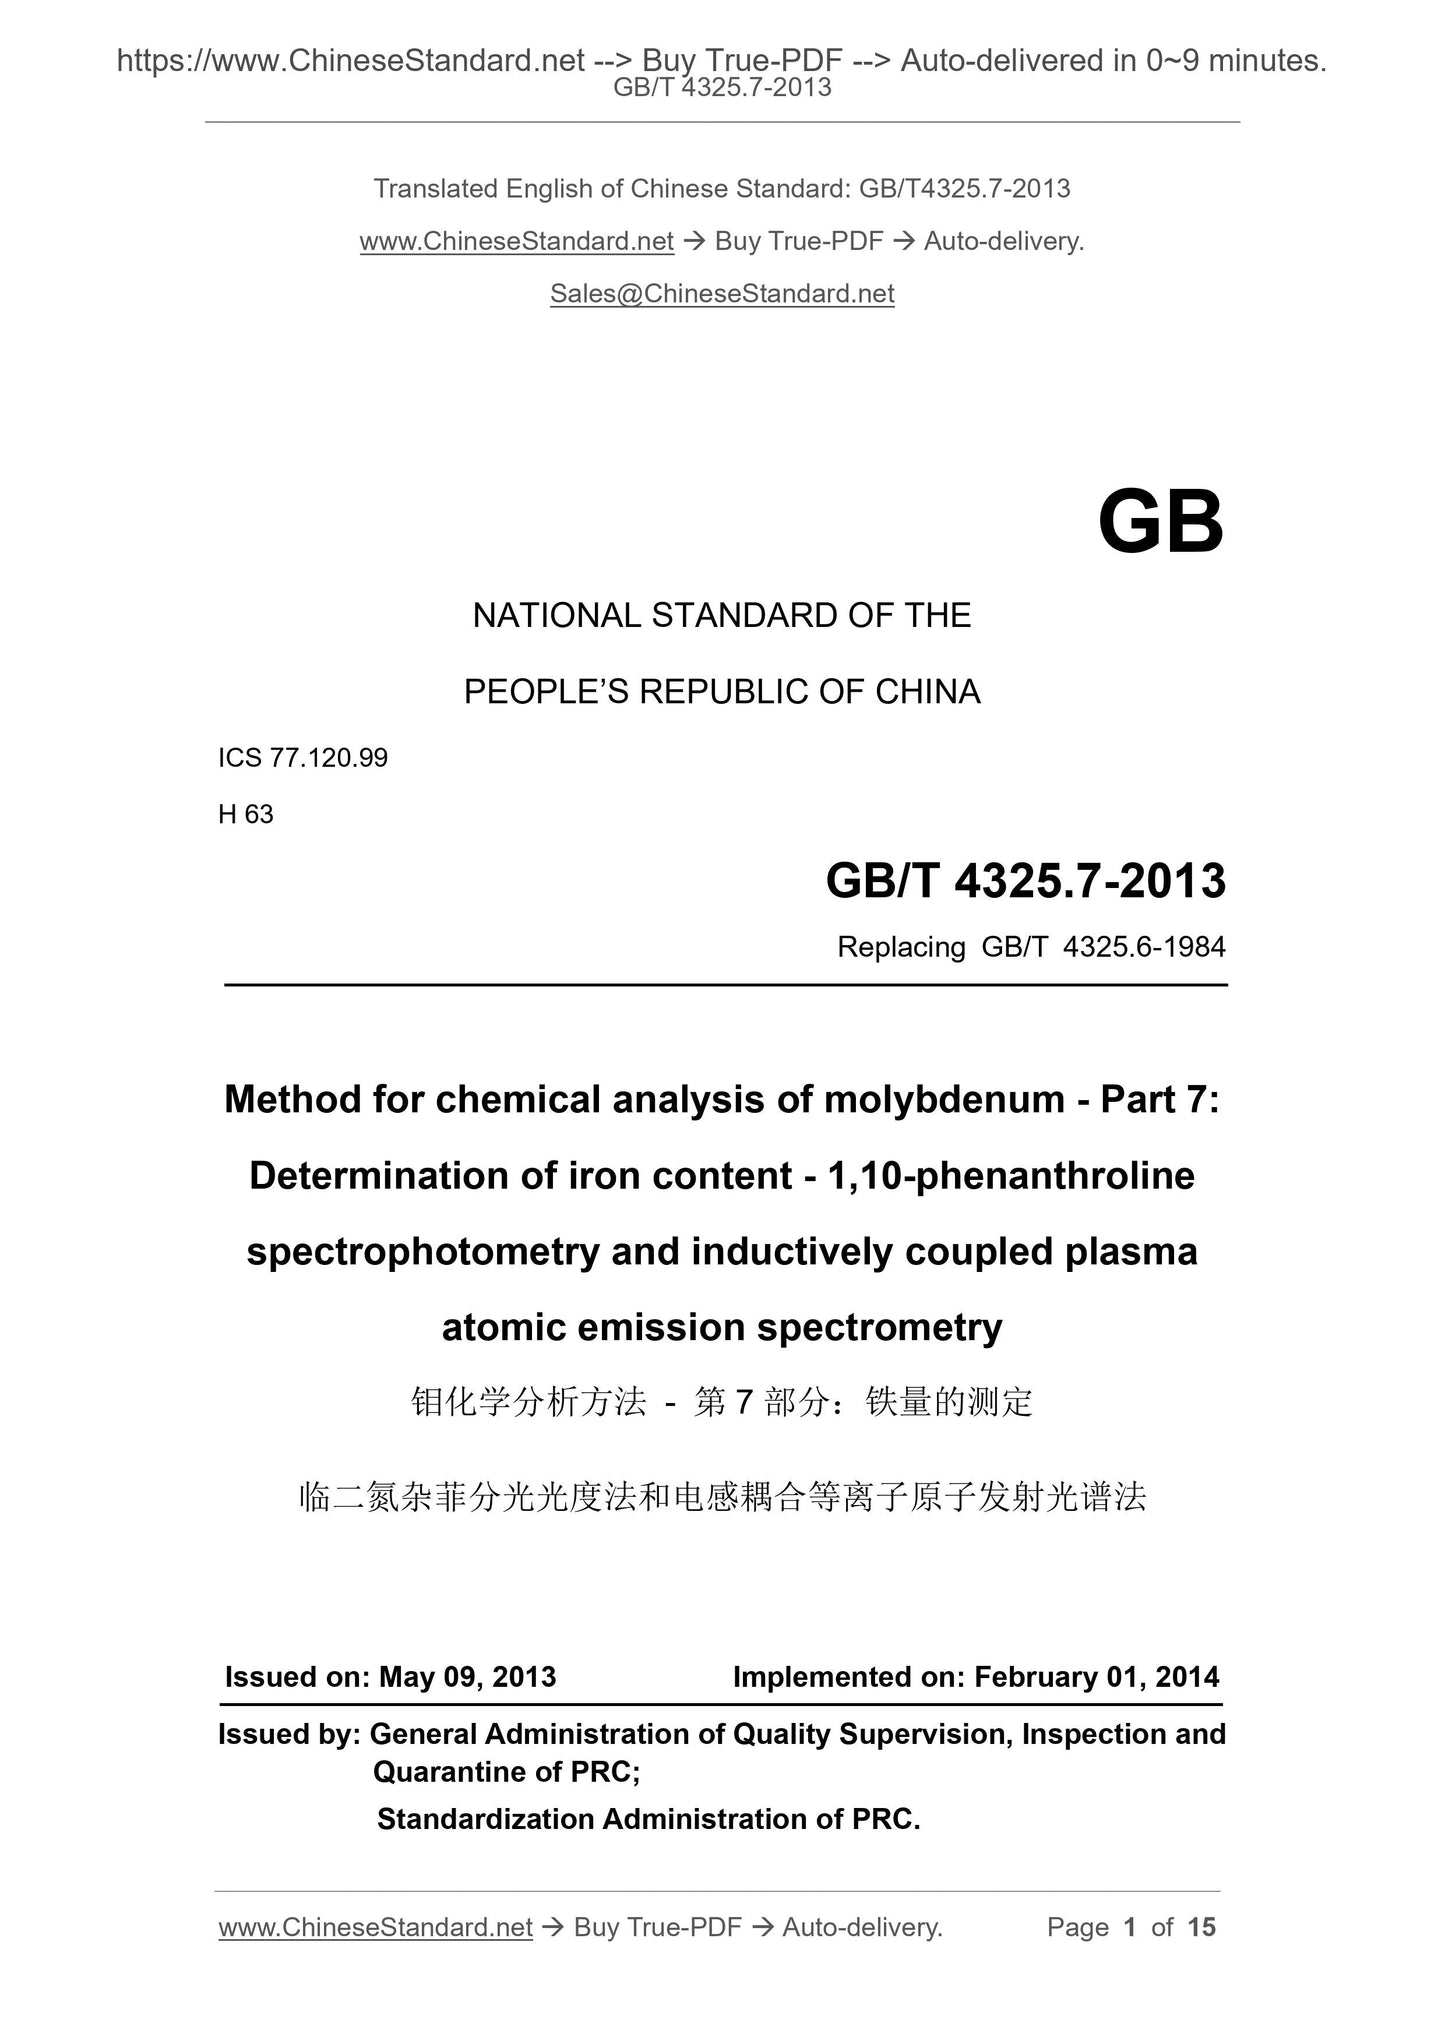 GB/T 4325.7-2013 Page 1